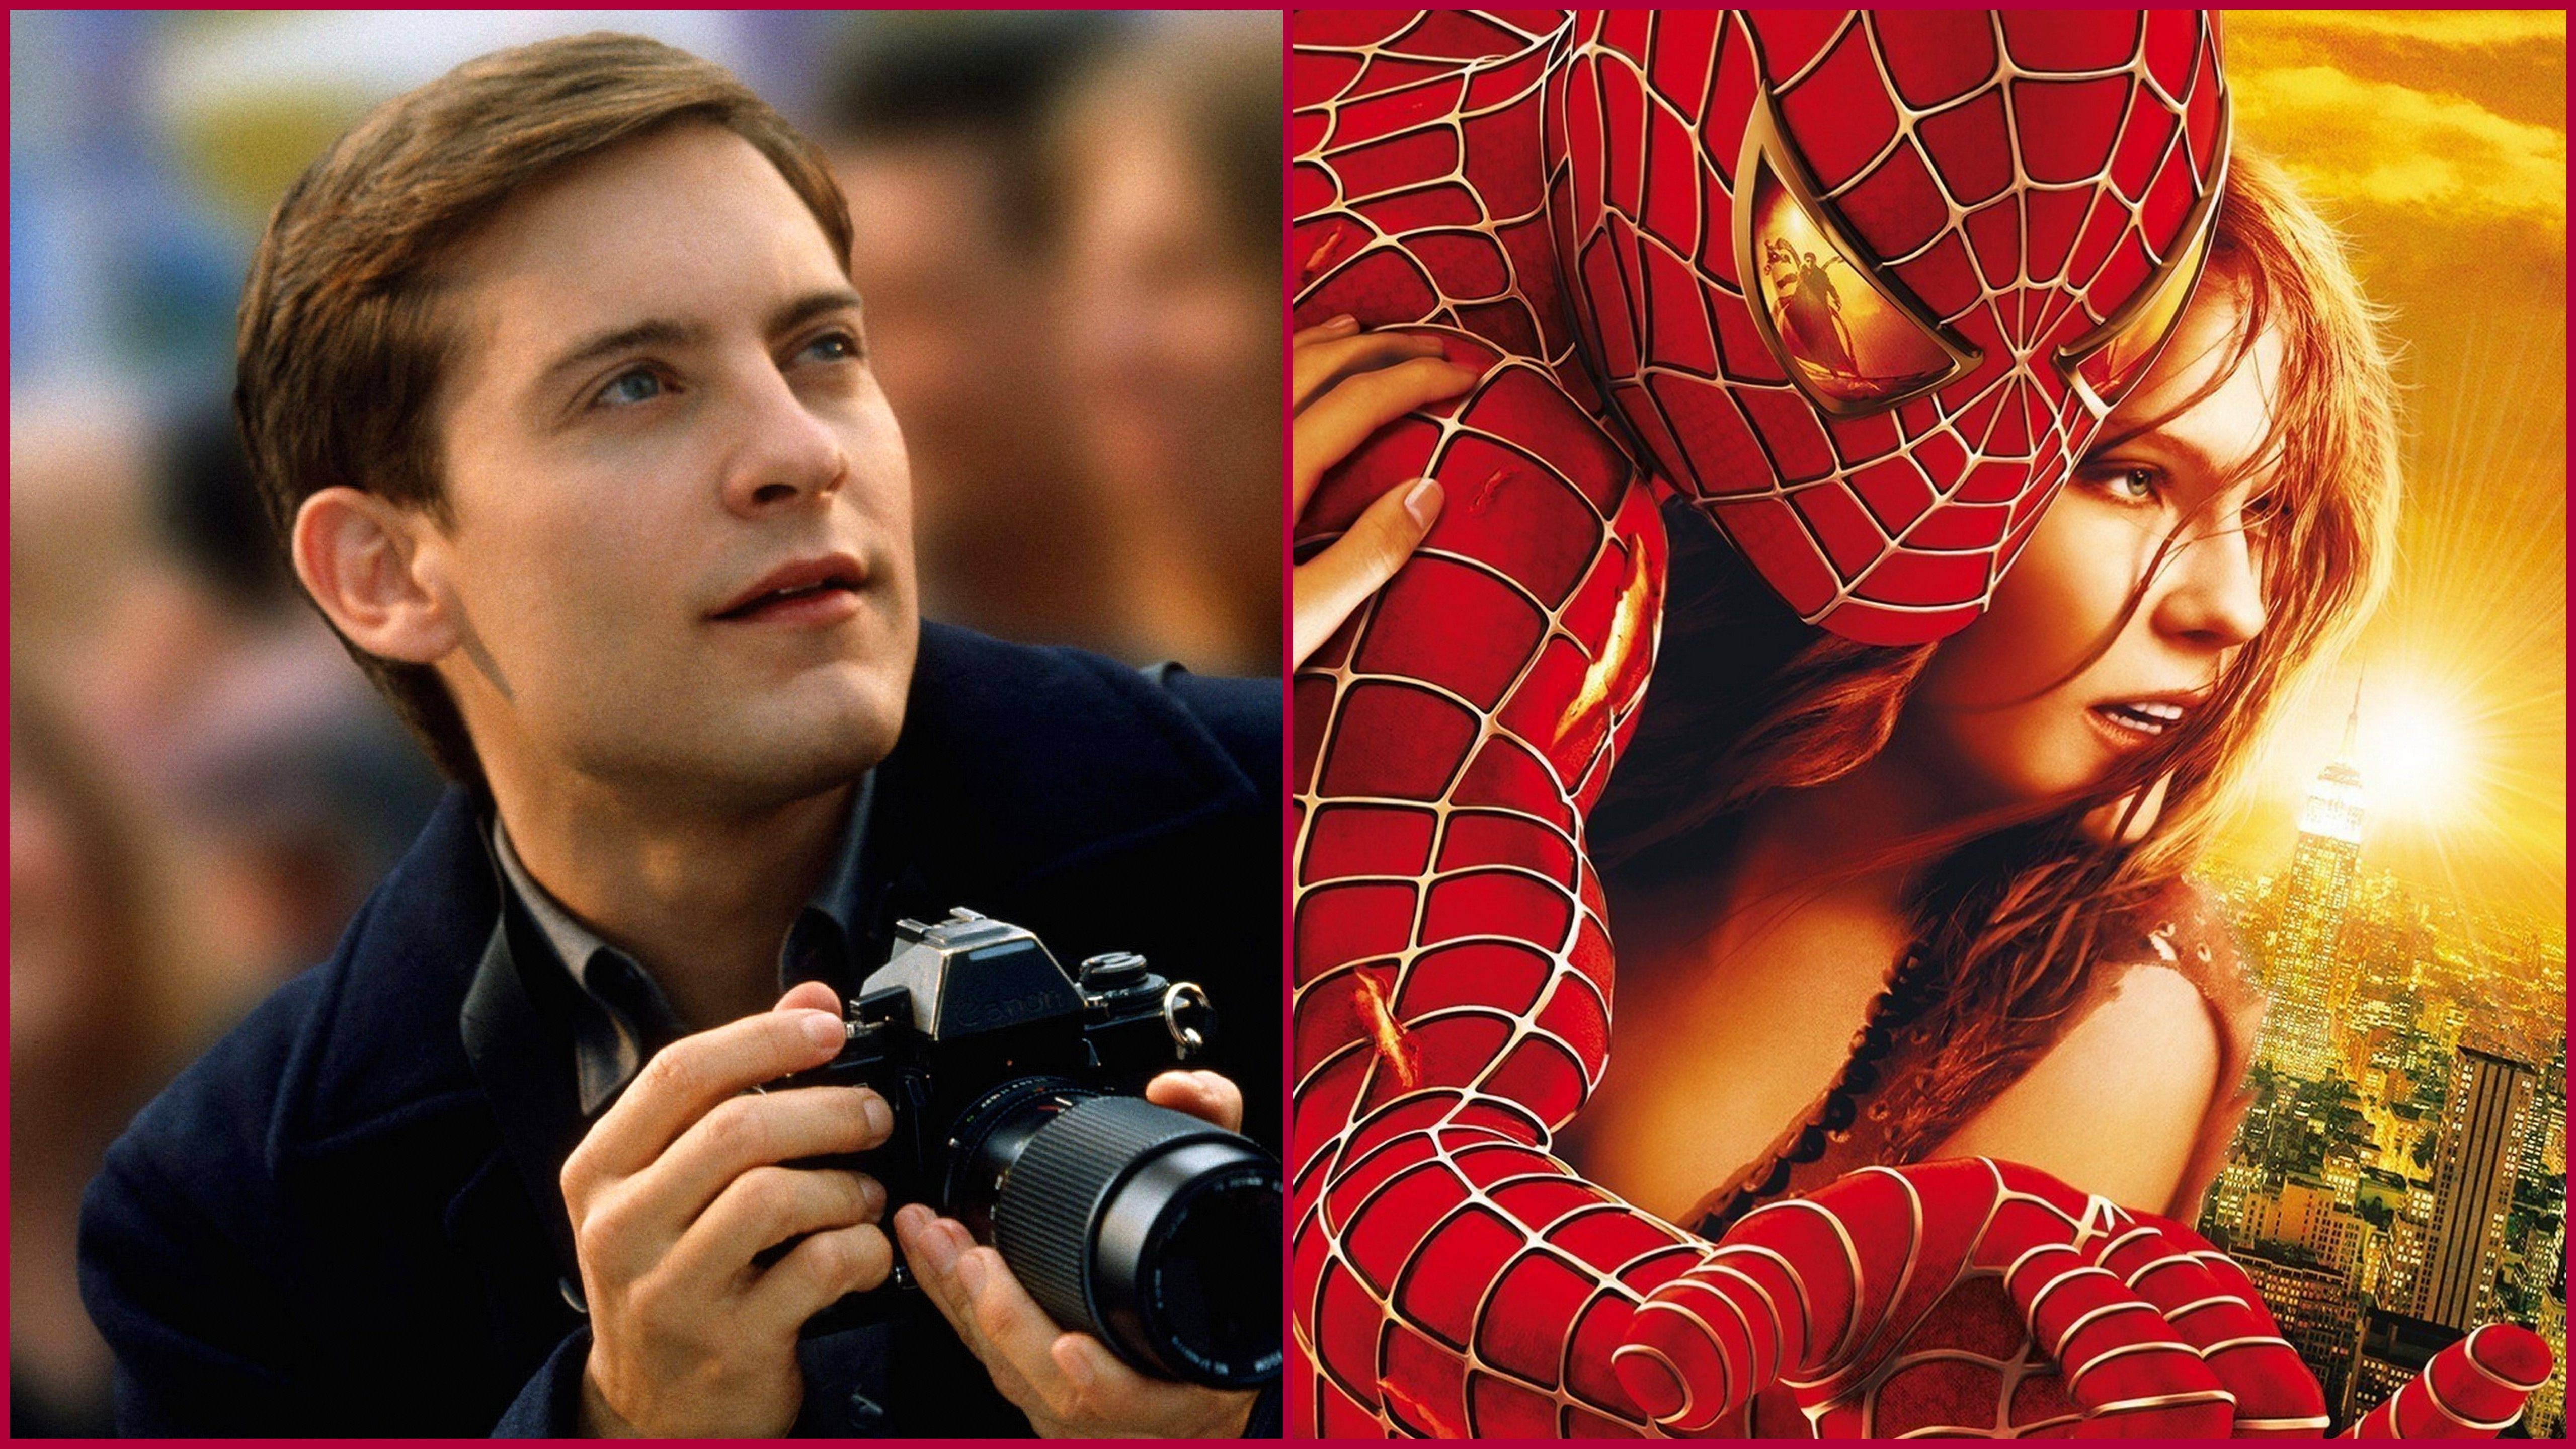 When the stars finally began to align for the Spider-Man movie, director Sa...